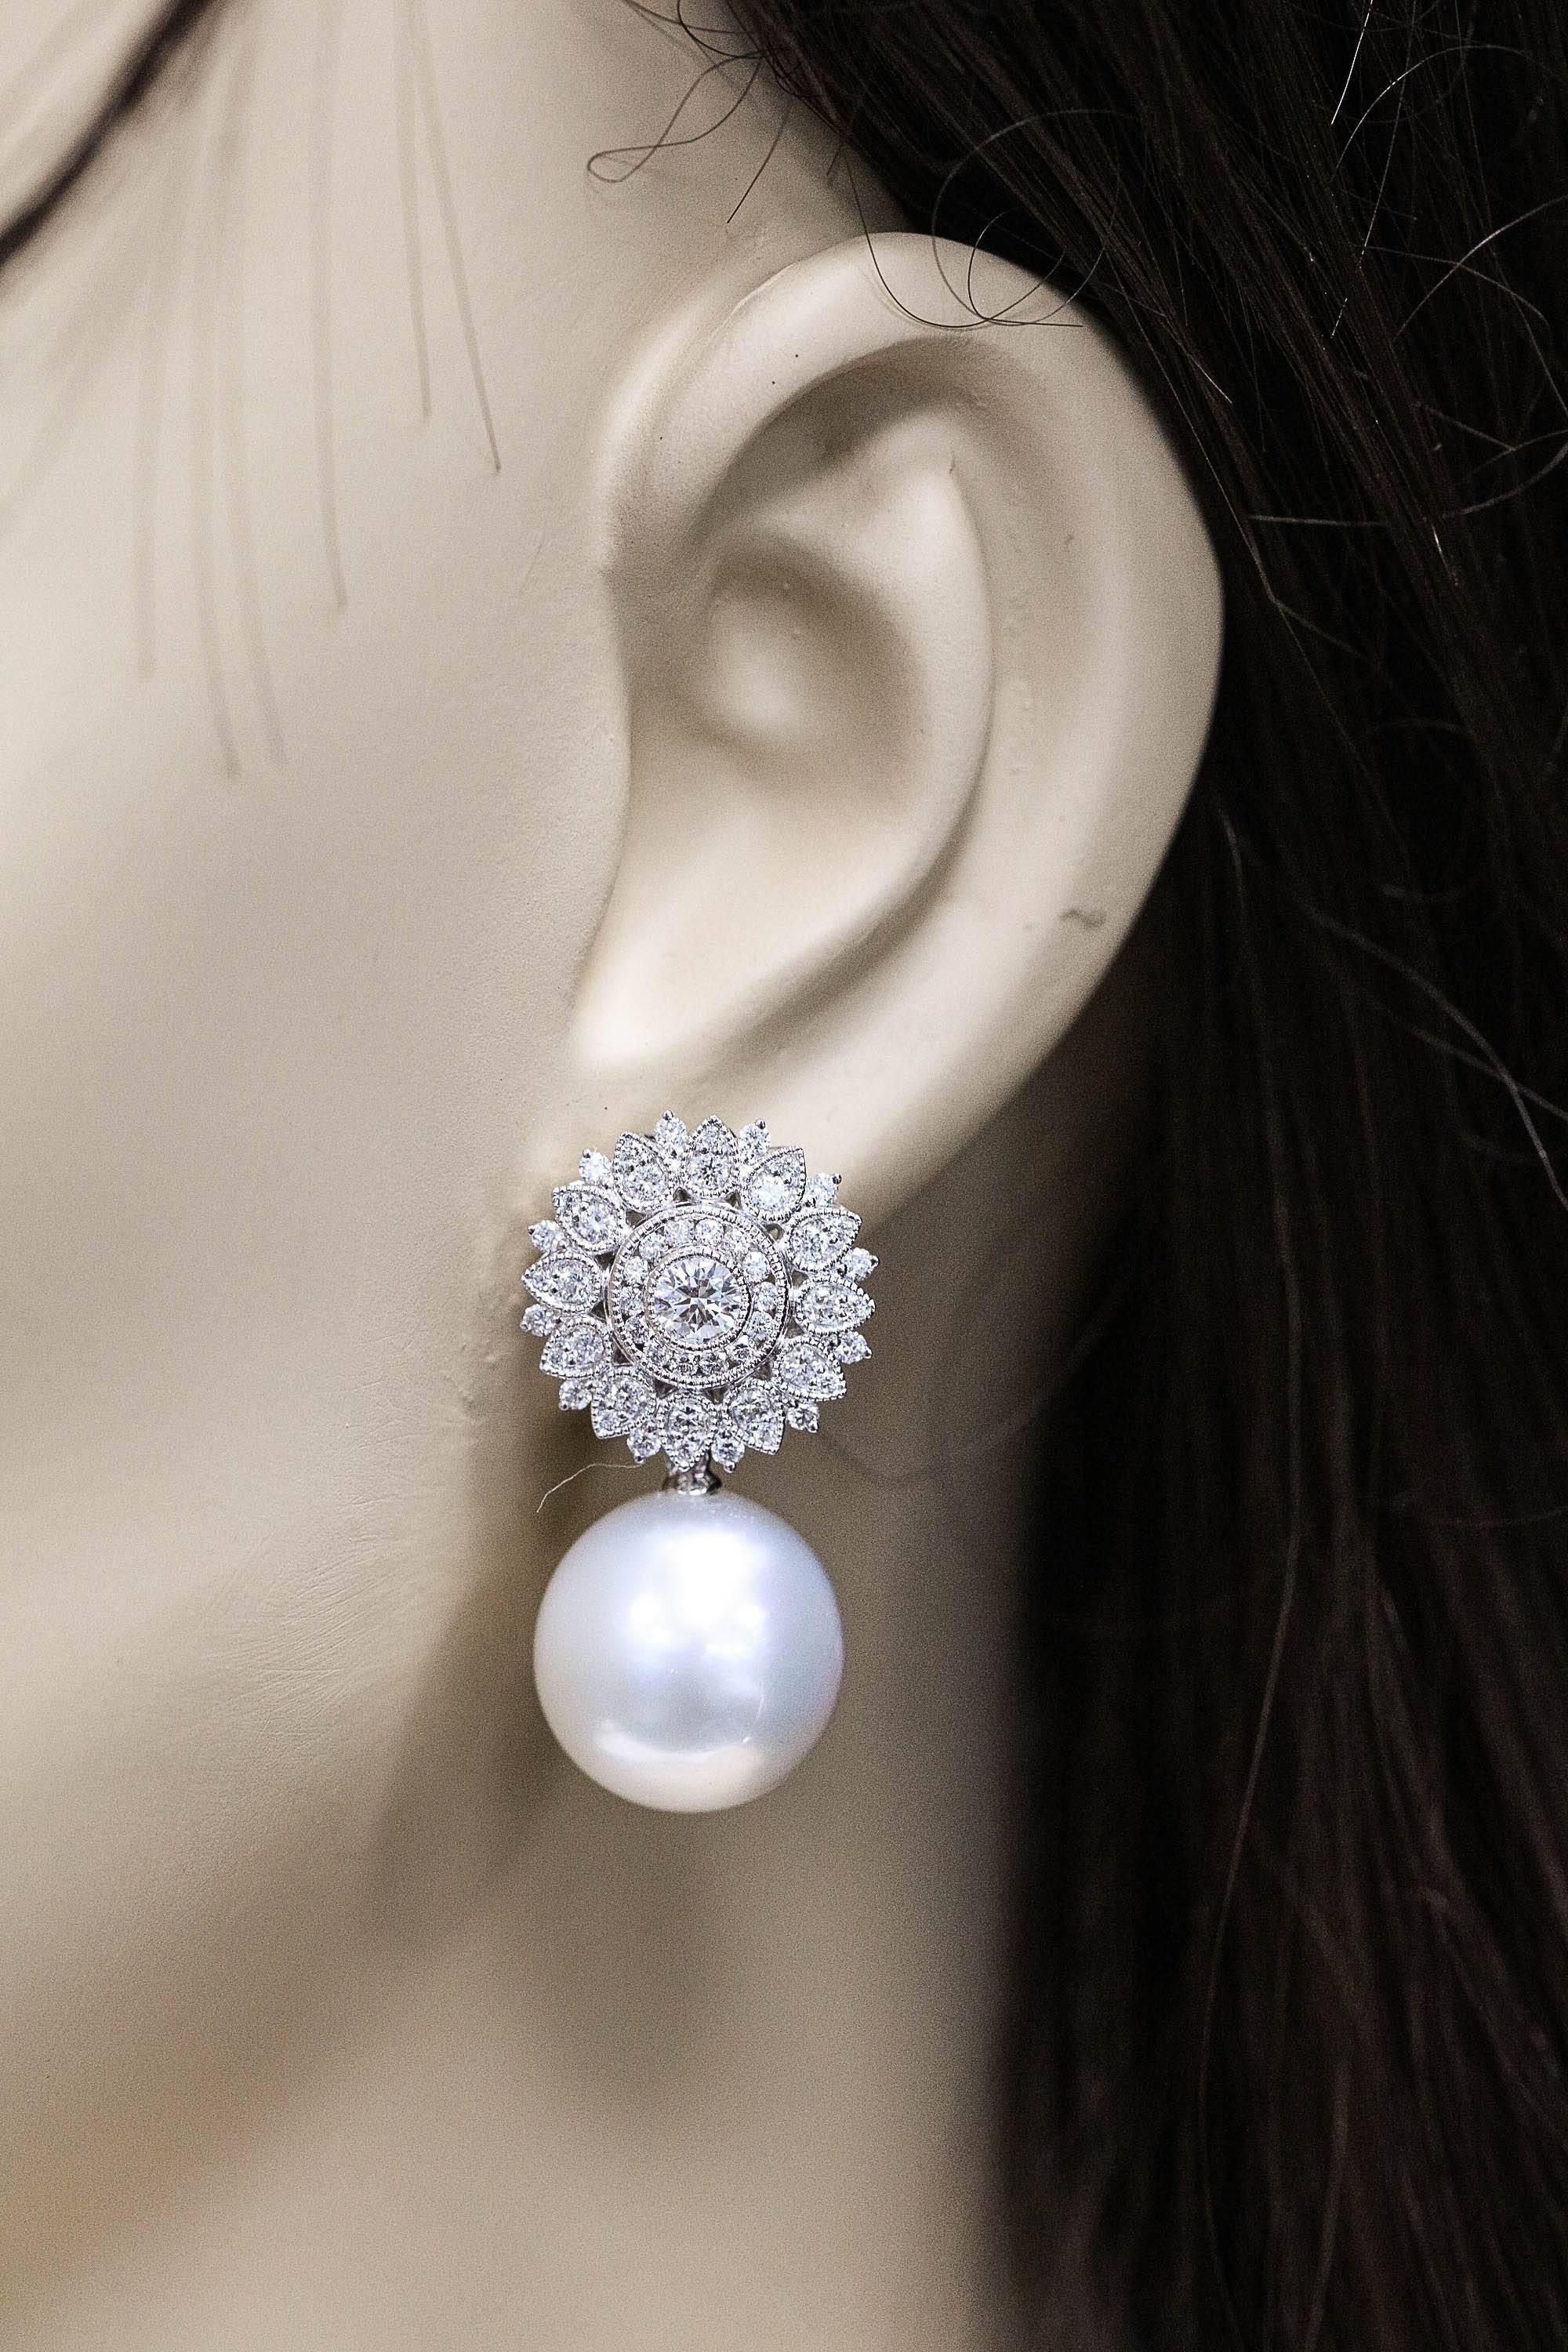 18K White gold earrings featuring a diamond sunflower motif weighing 1.35 carats with two South Sea pearls measuring 14-15 mm
Color: G-H
Clarity SI